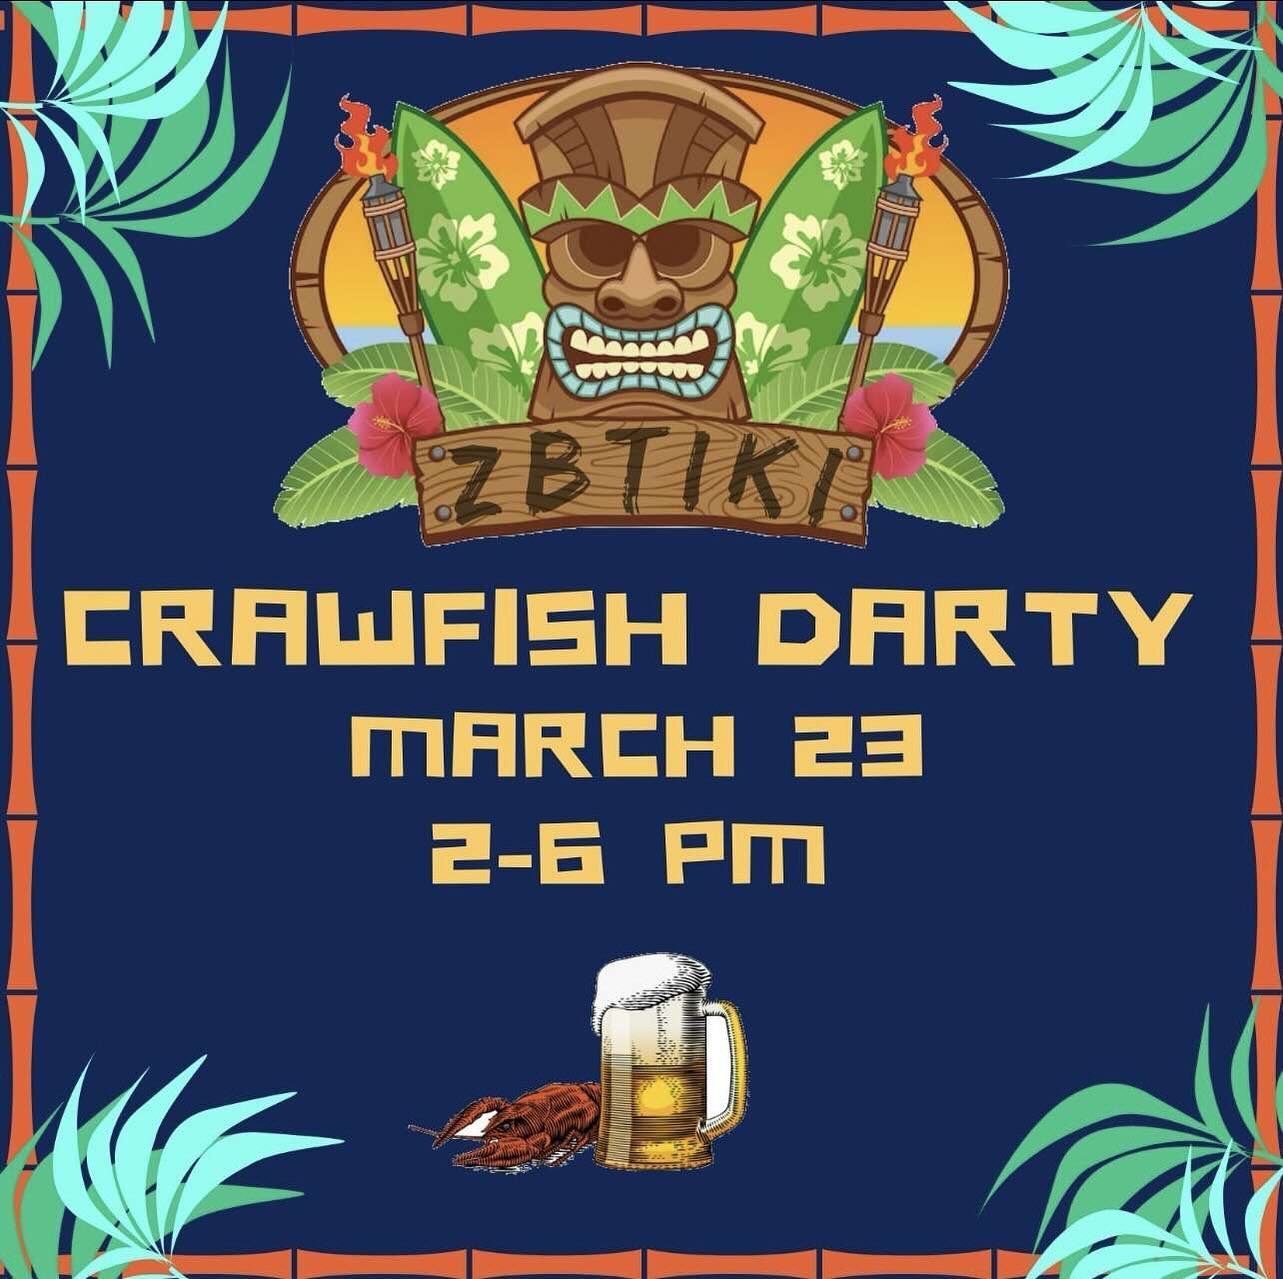 Come join us for ZBTIKI in the courtyard today from 2-6 and enjoy some crawfish and live music by Clockwork Tuscaloosa!